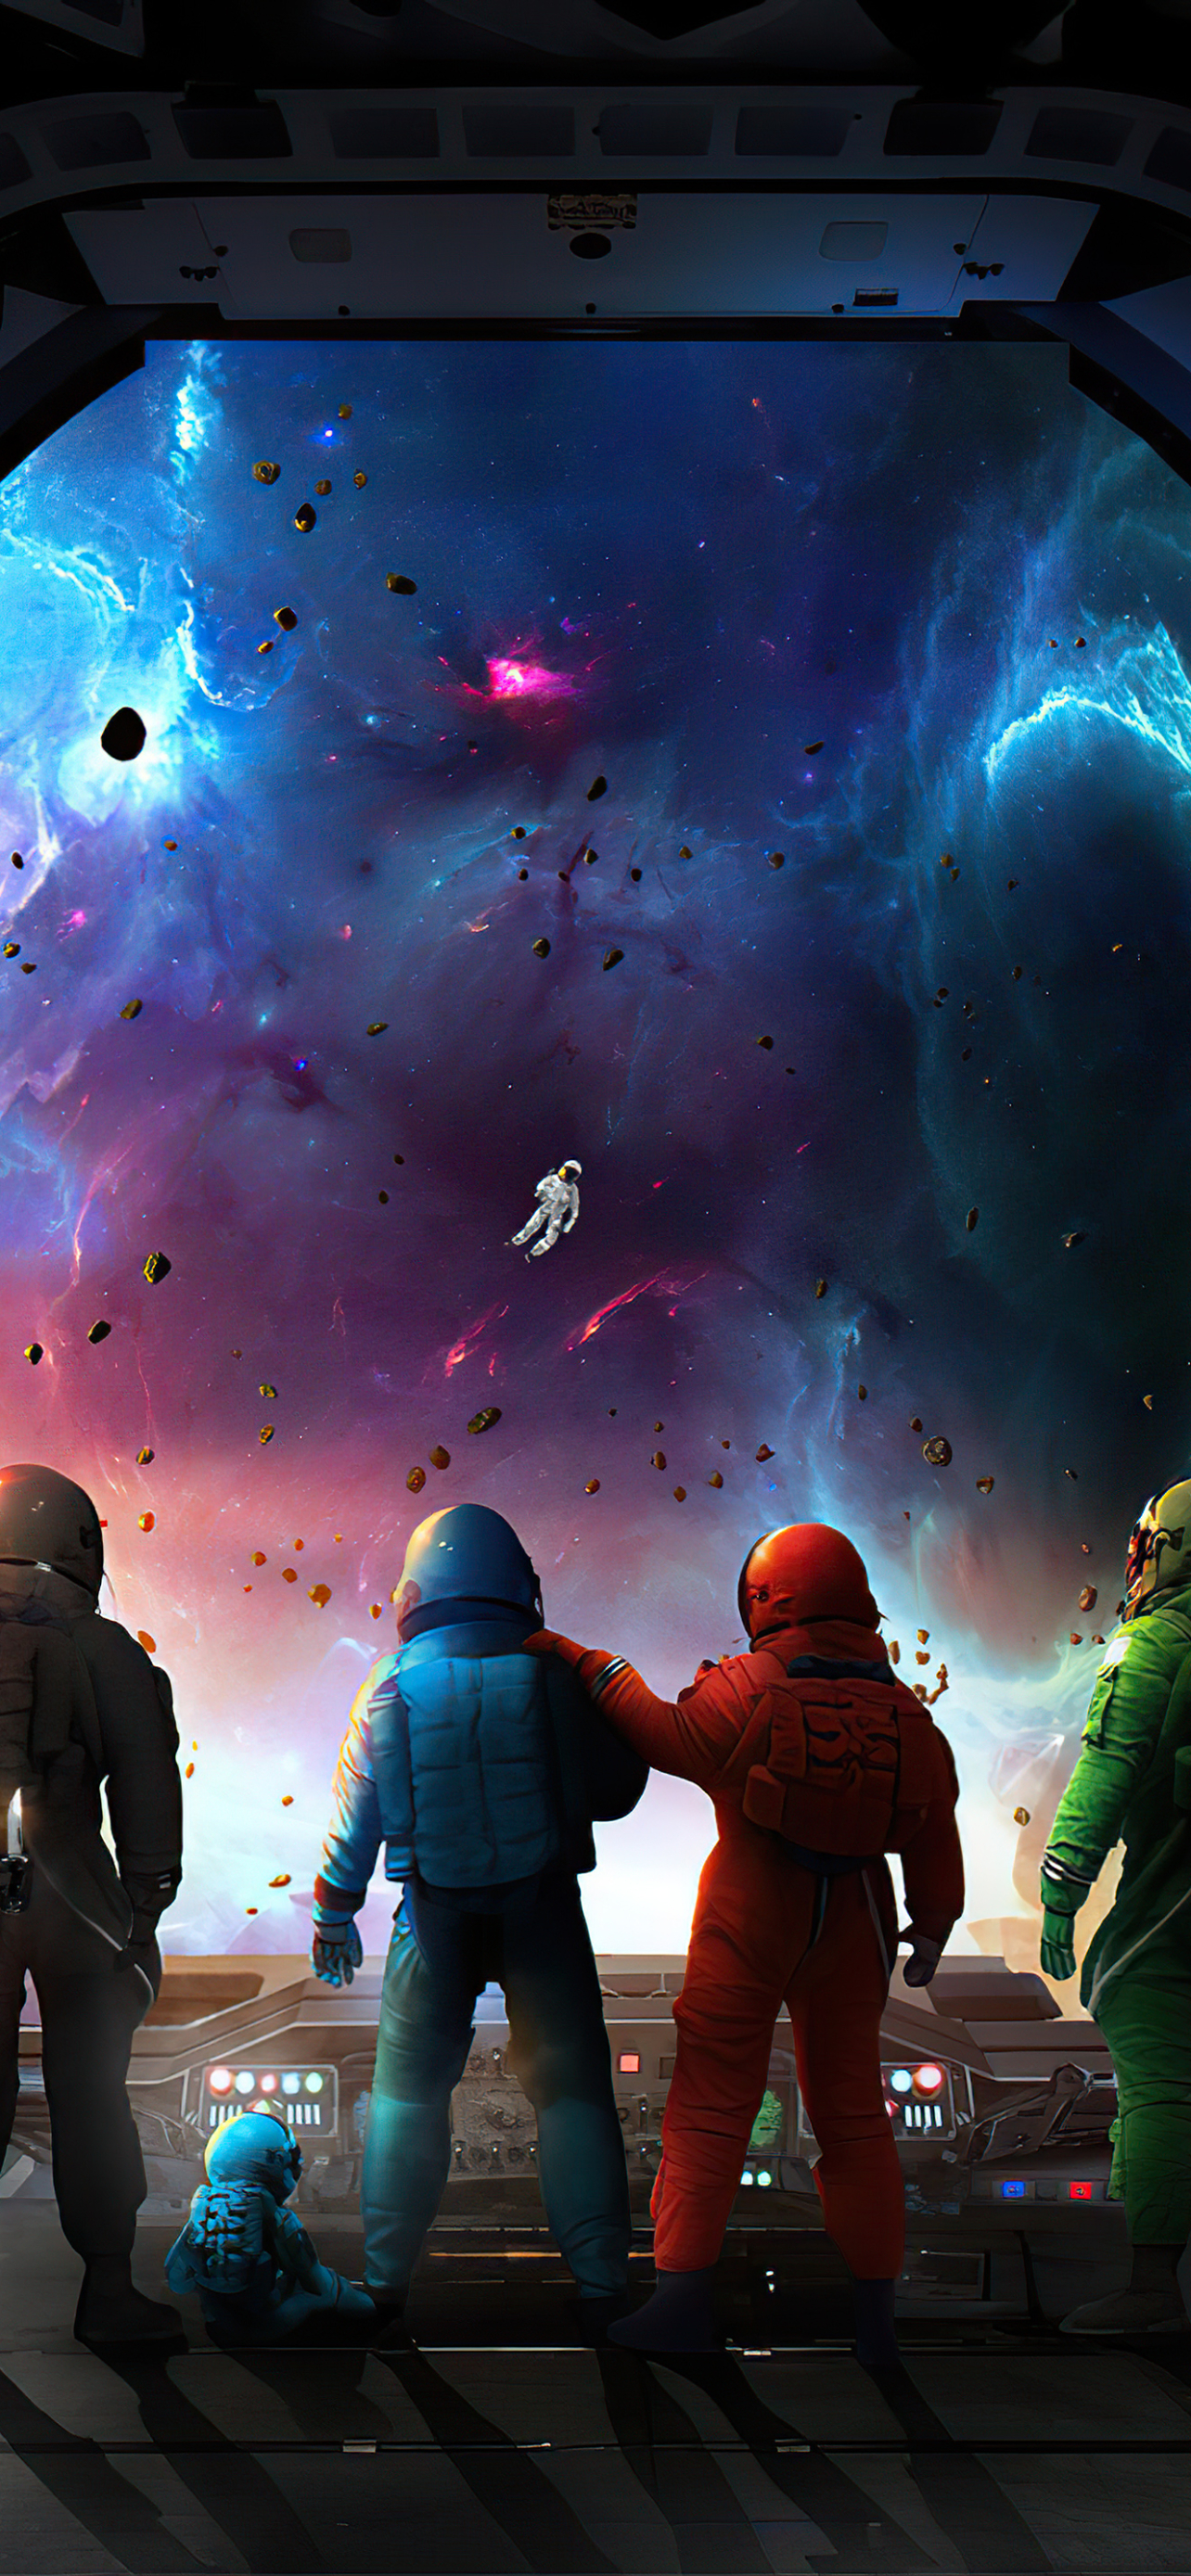 among us, video game, astronaut wallpaper for mobile